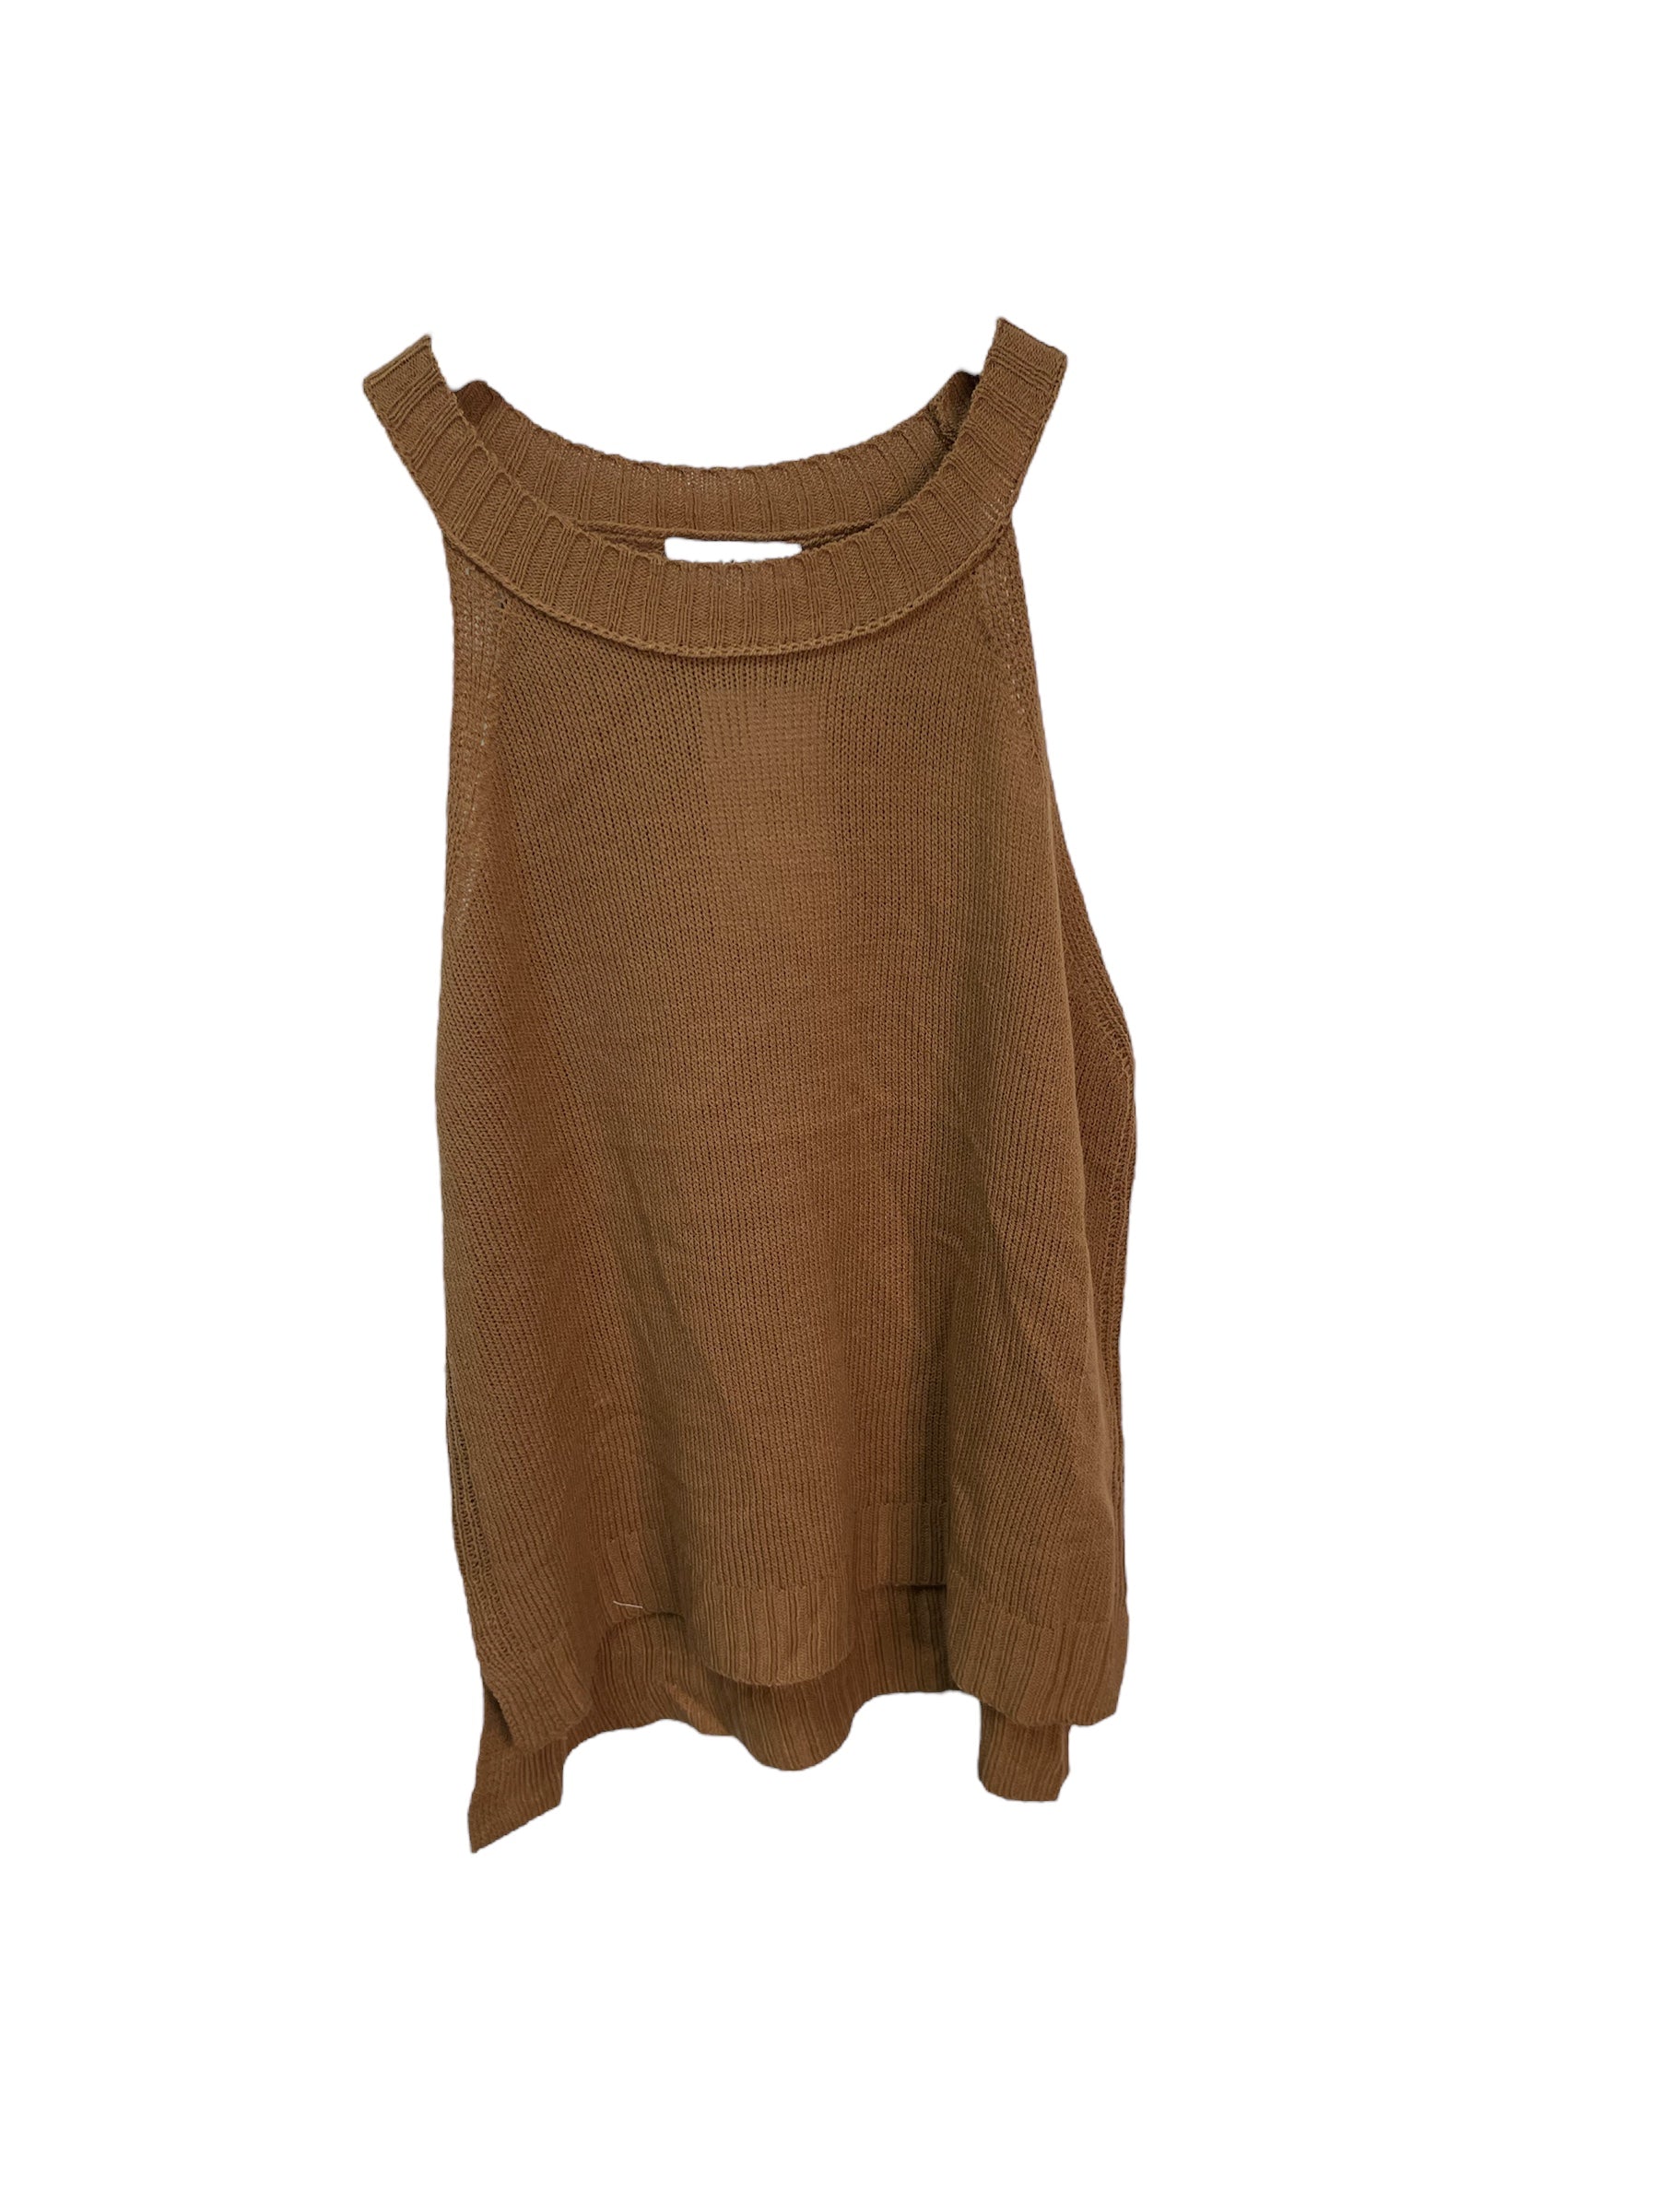 High Neck Sweater Tank in Coco